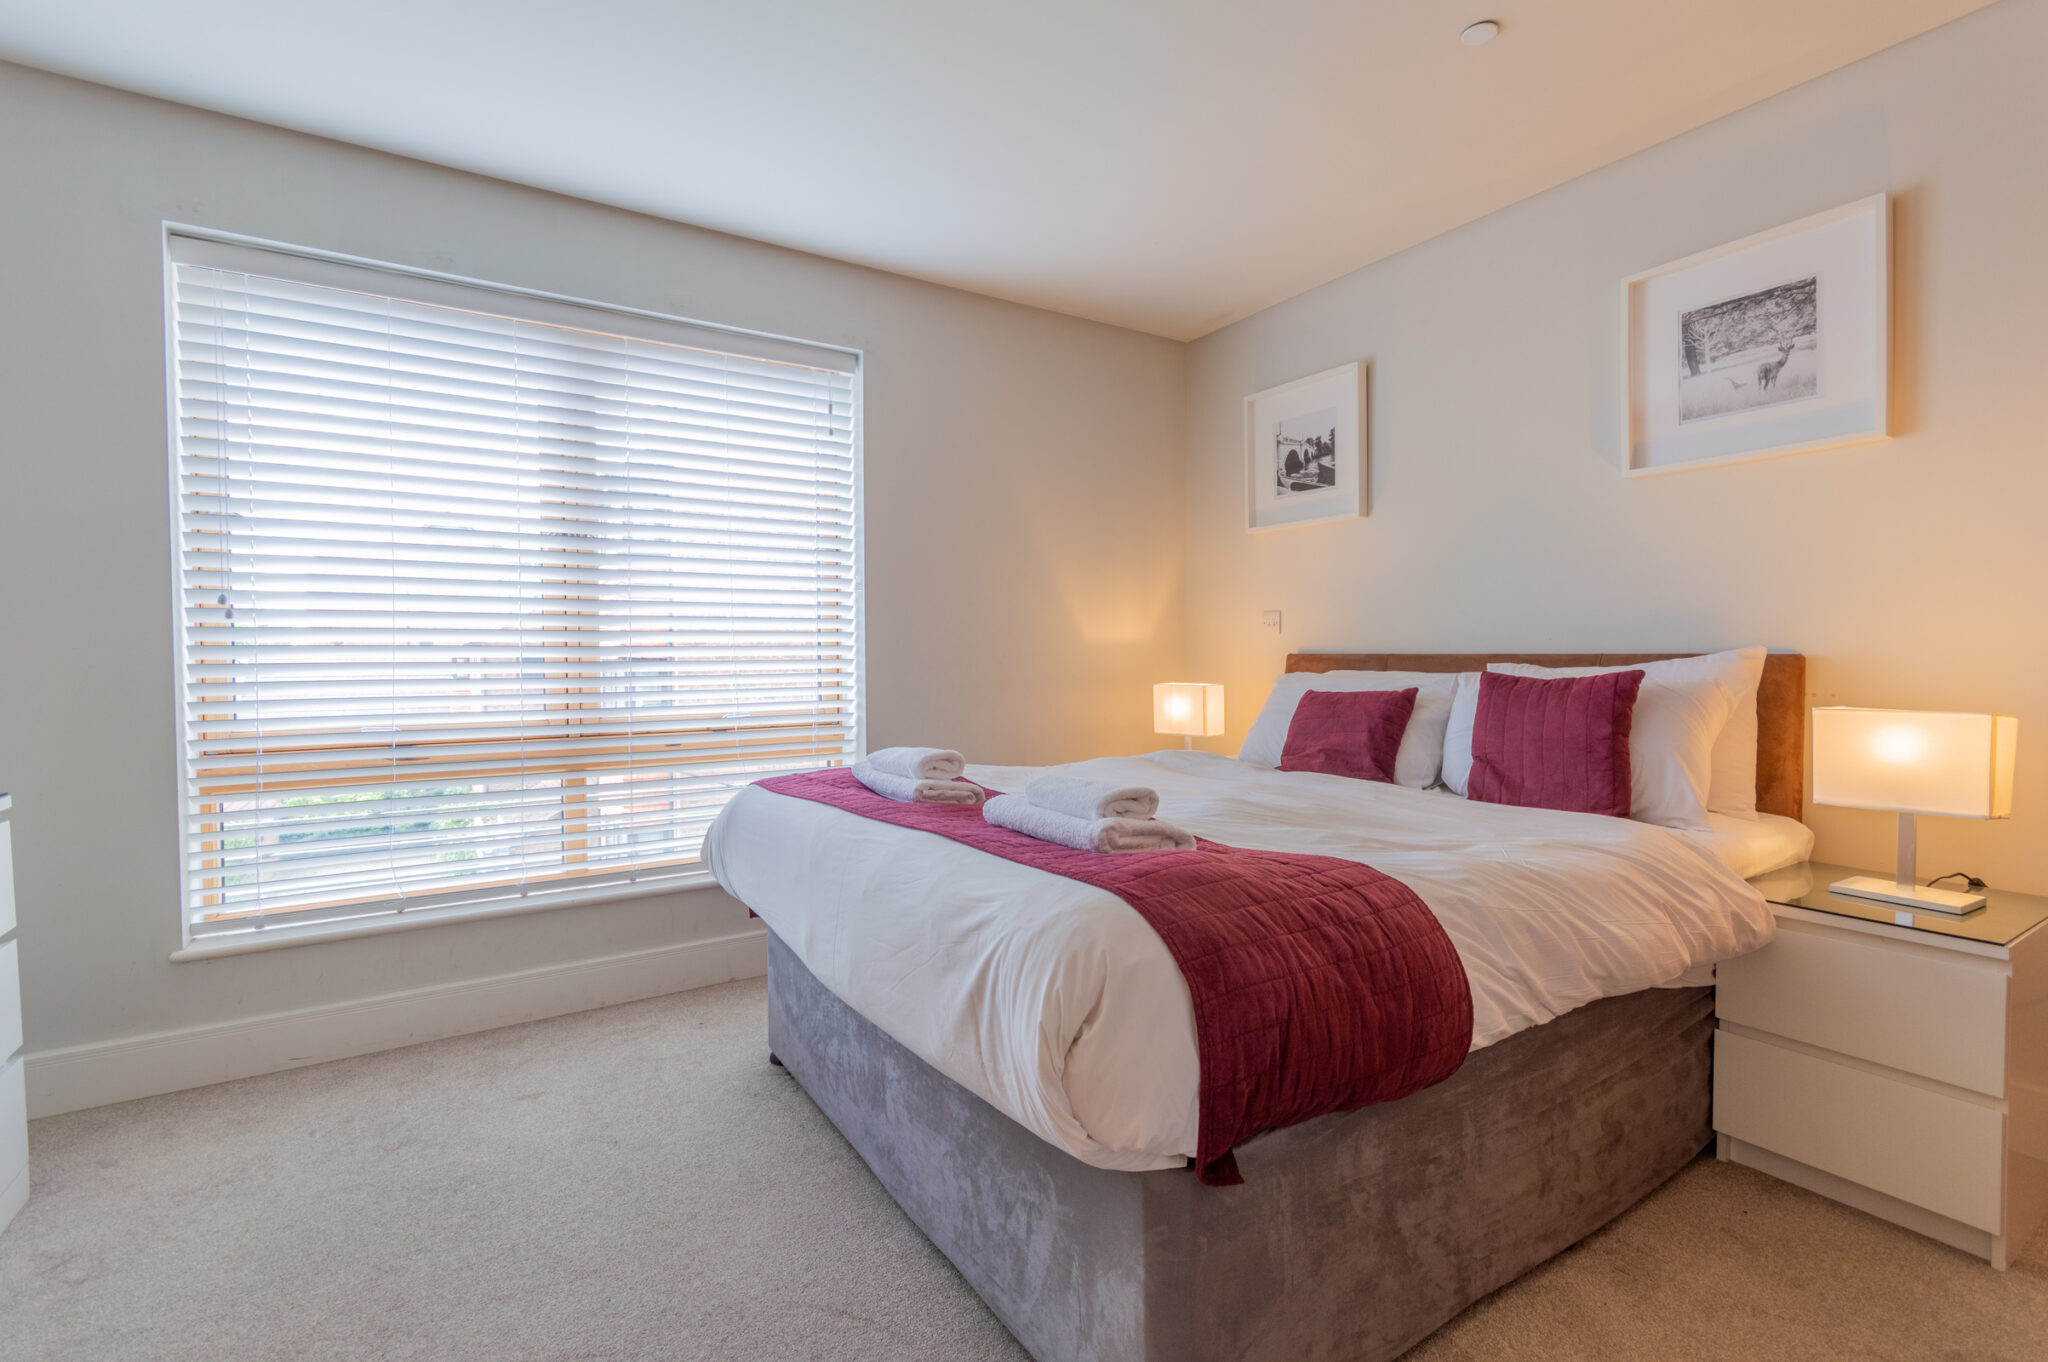 The Green Apartments - West London Serviced Apartments - London | Urban Stay